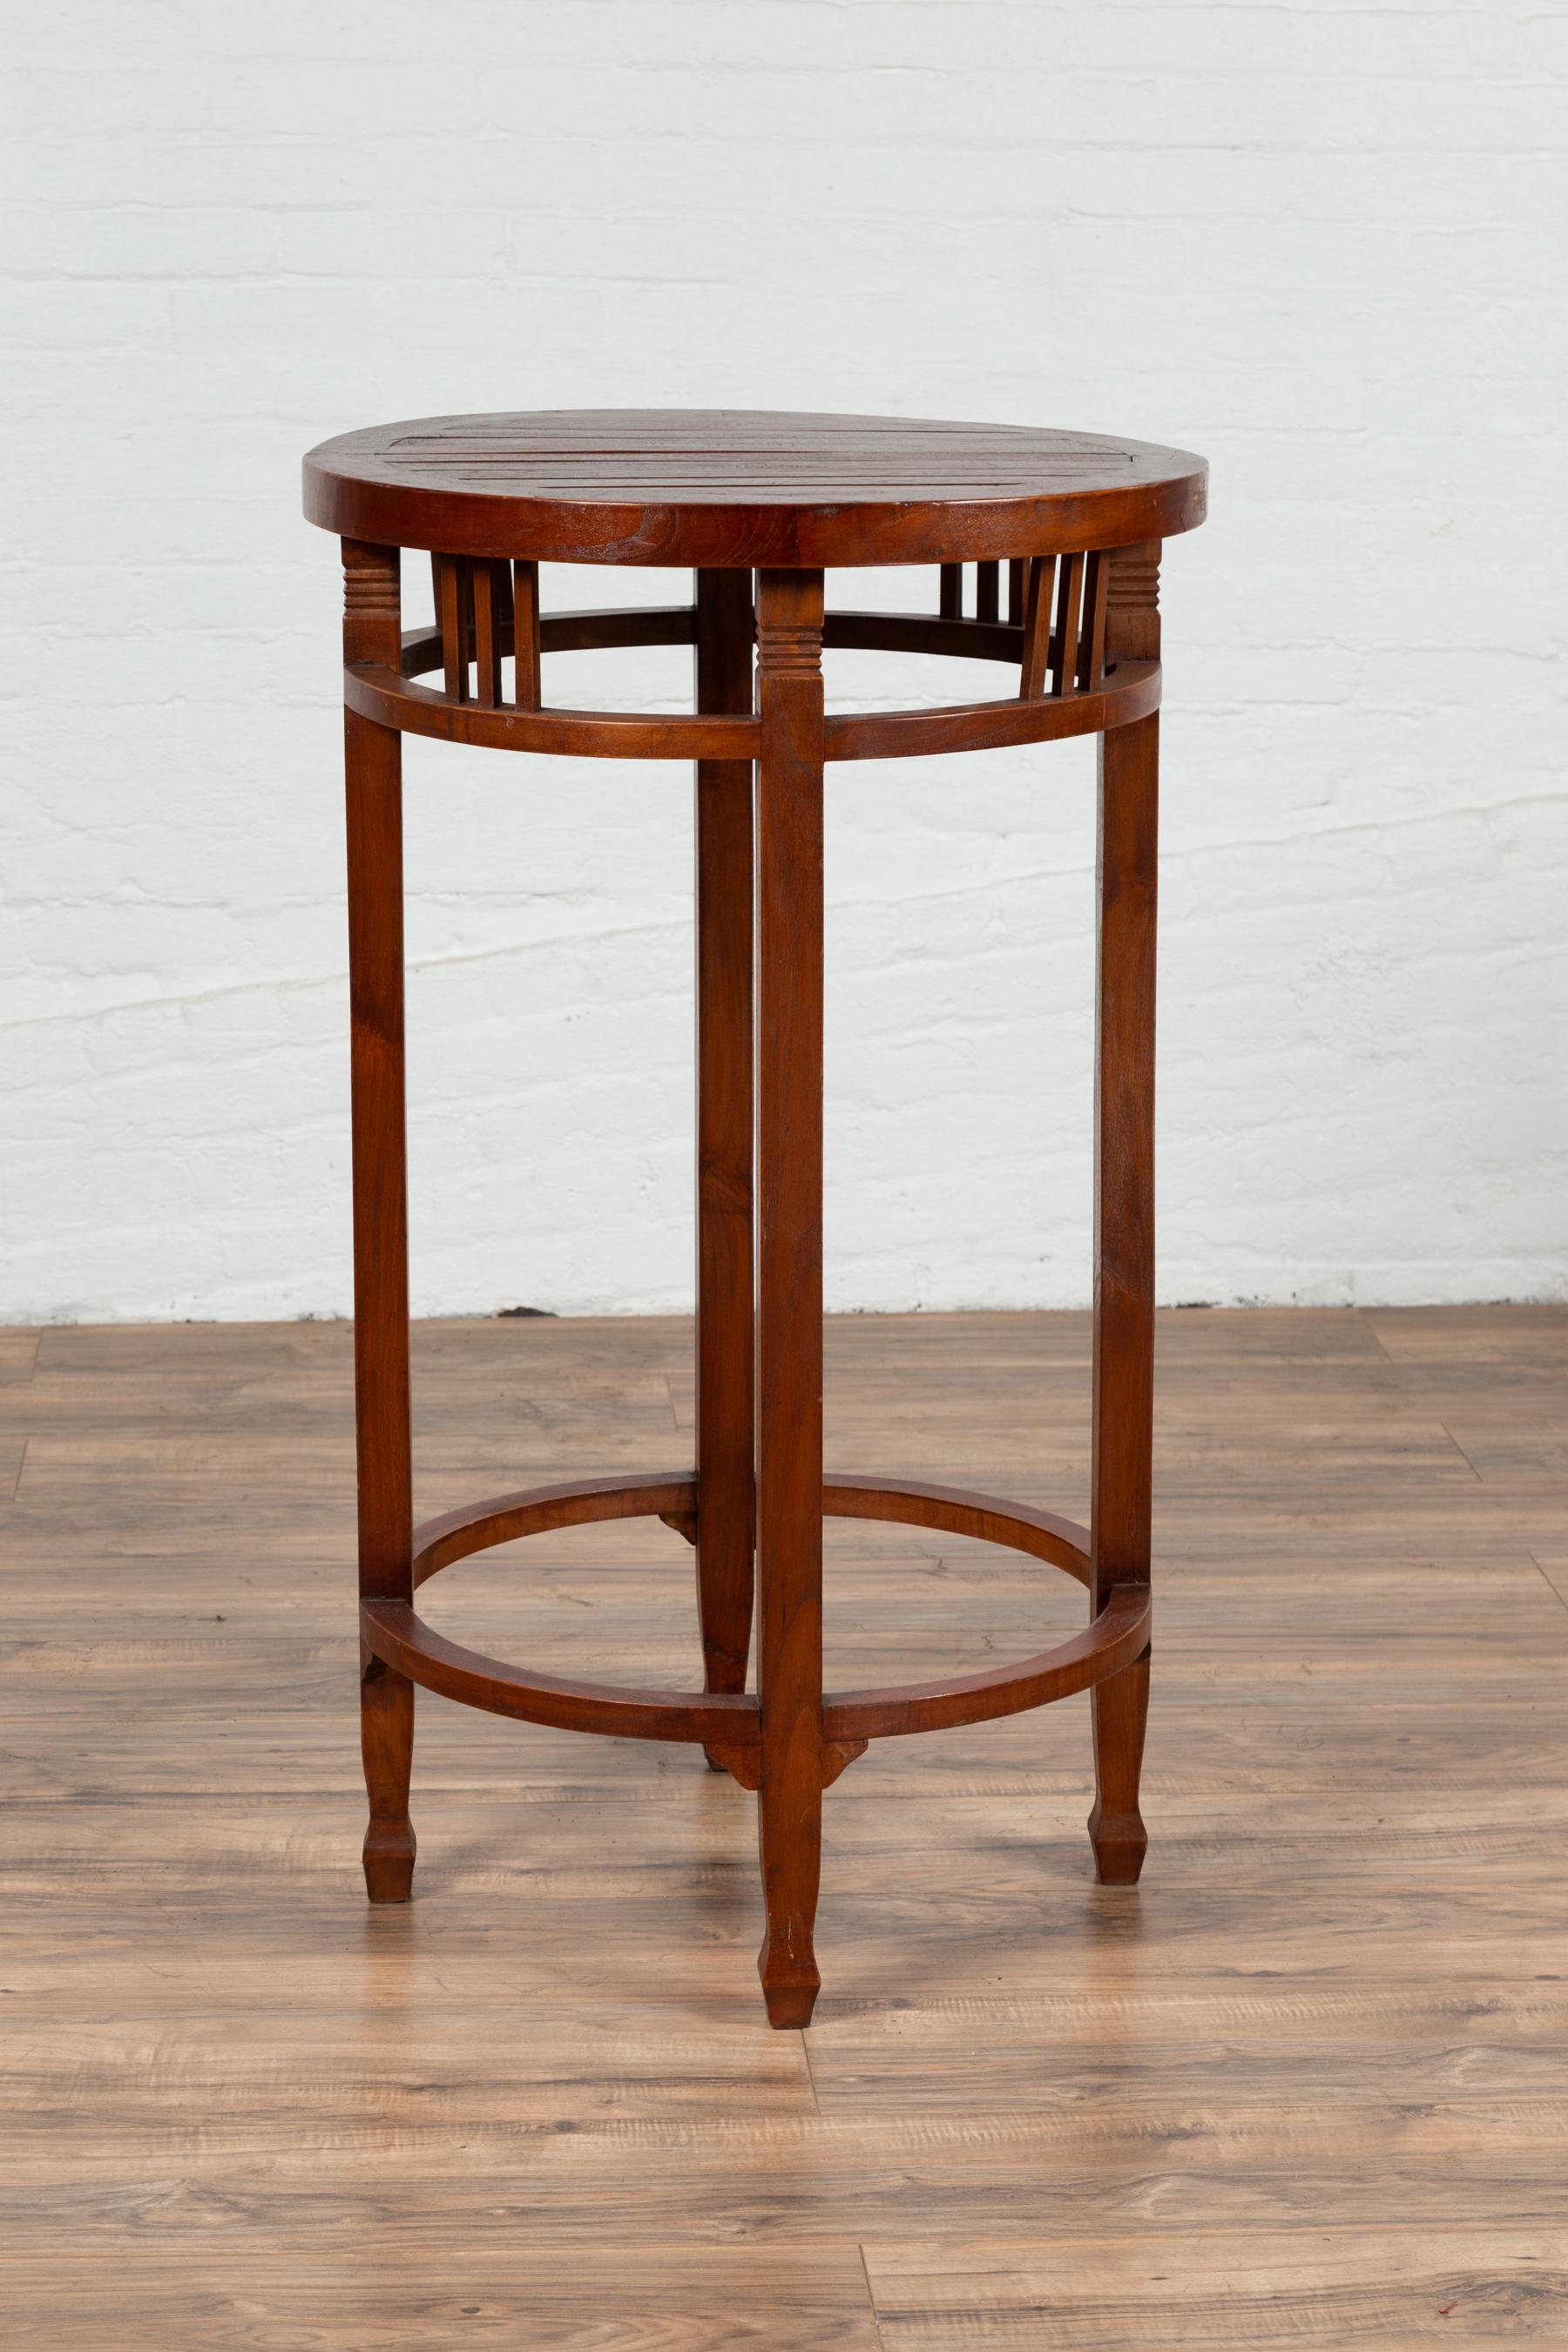 tall round pedestal table